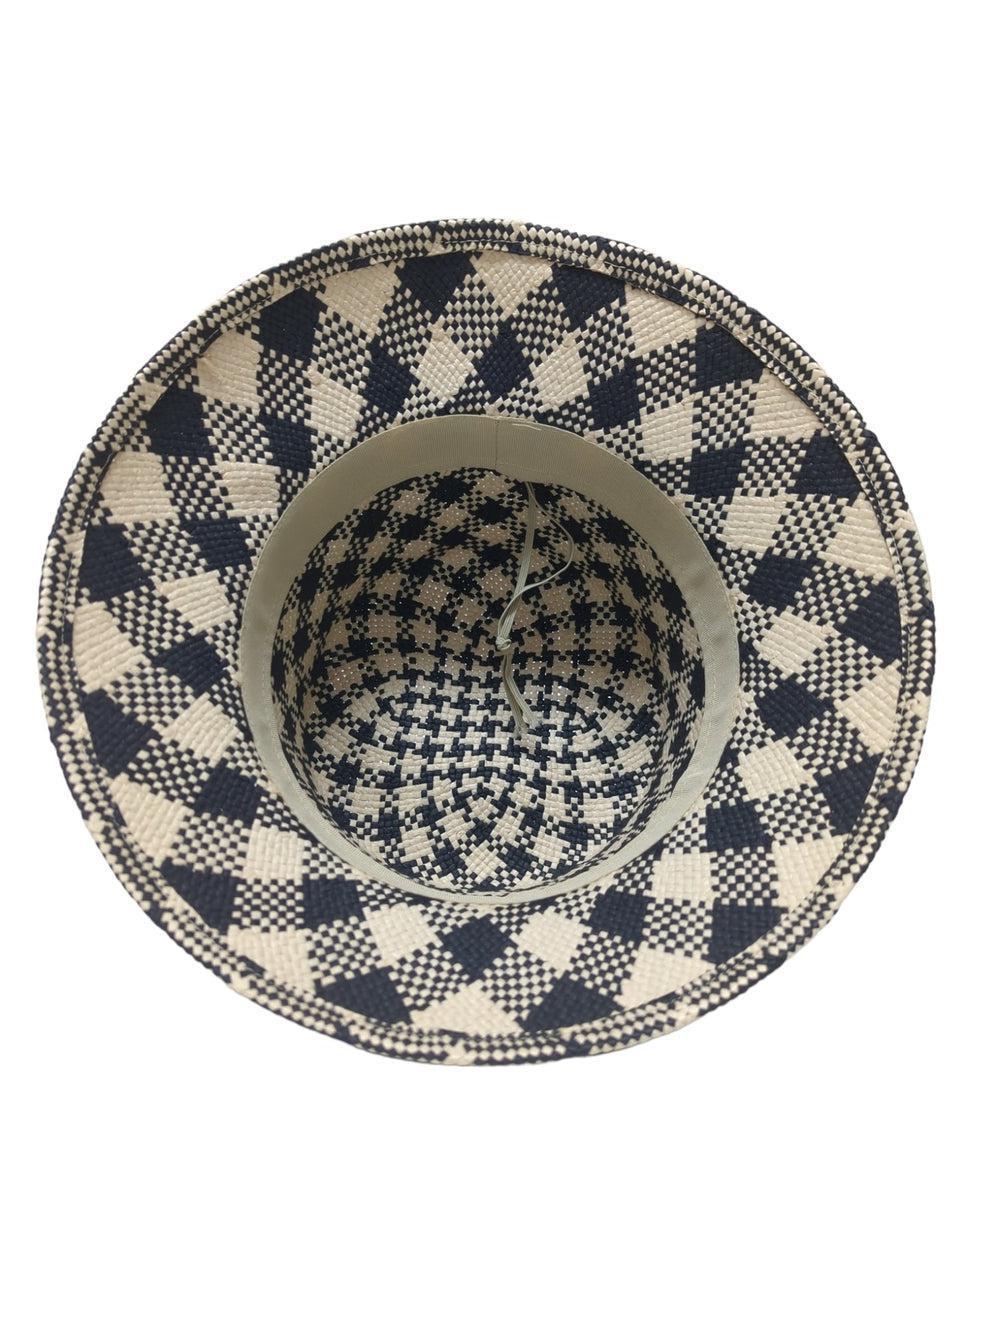 An bottom view of a black and natural straw bucket hat